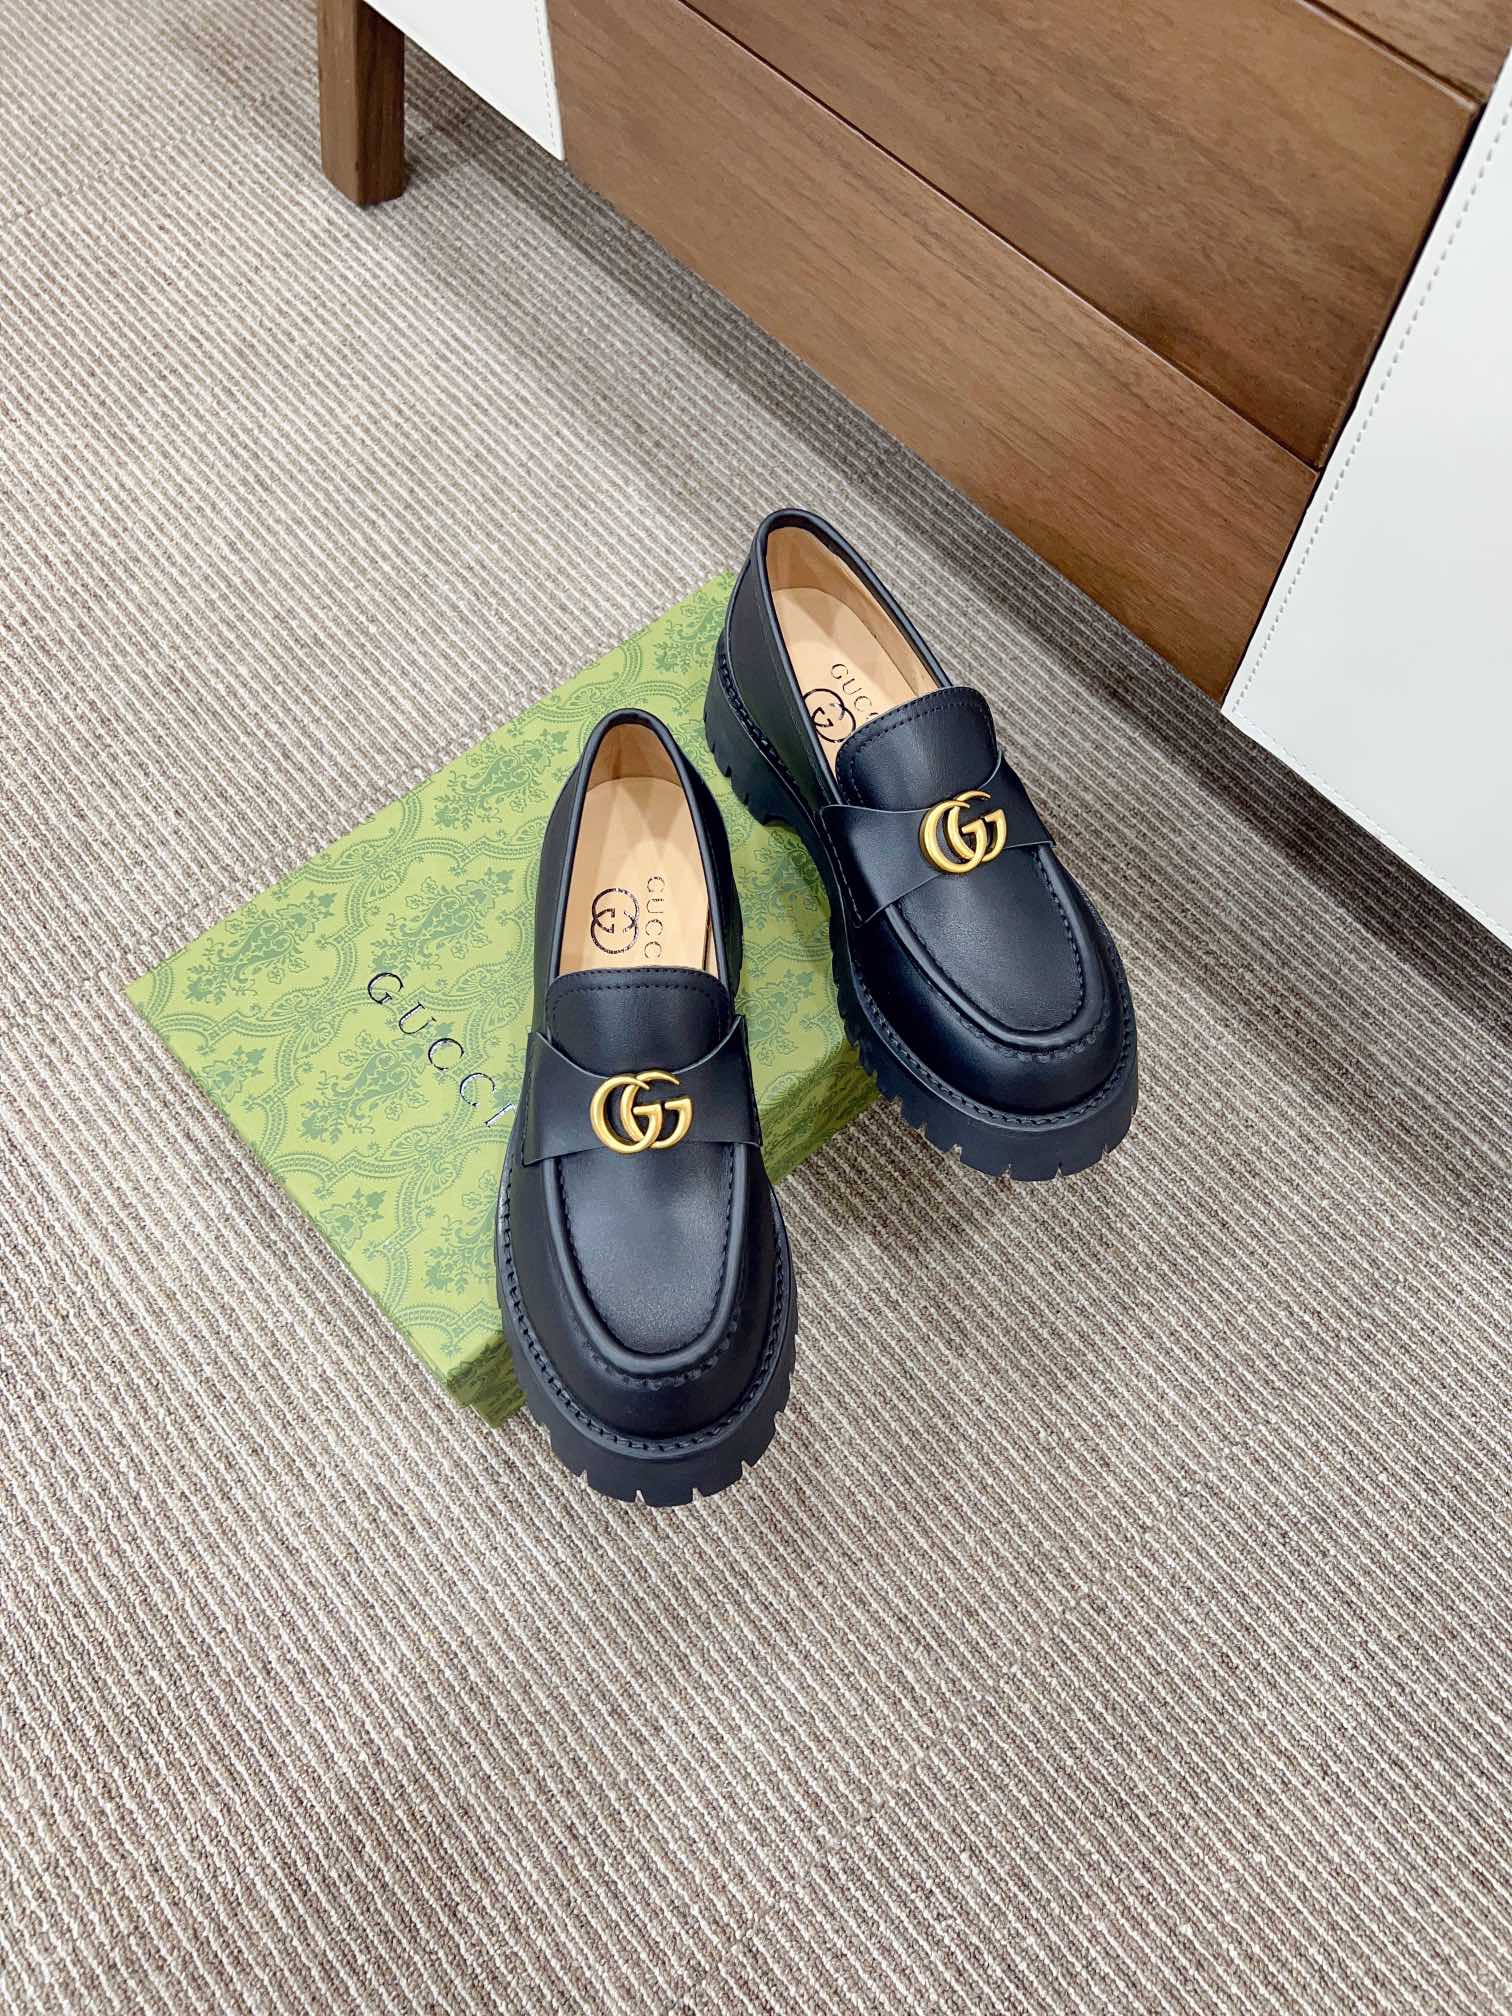 Where could you find a great quality designer
 Gucci Loafers Single Layer Shoes Blue Rose Embroidery Genuine Leather Rubber Sheepskin Vintage